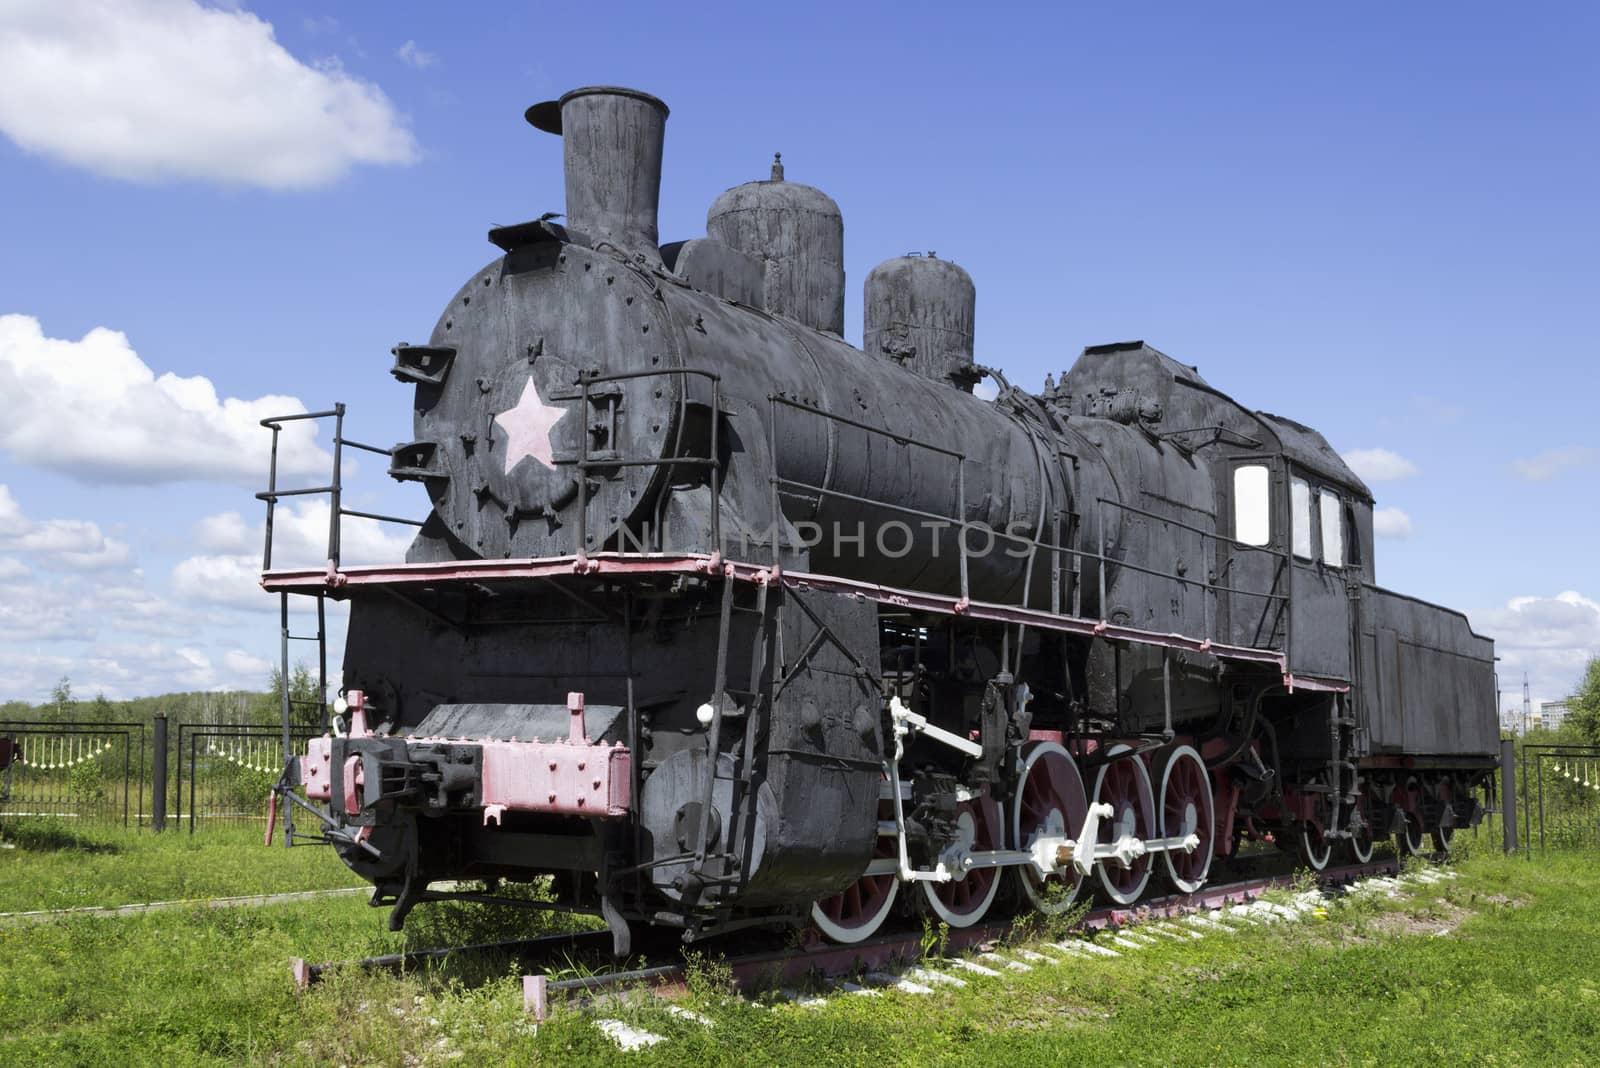 Russian steam locomotive in the early 20th century, the most massive in the world series, produced about 11 000 locomotives